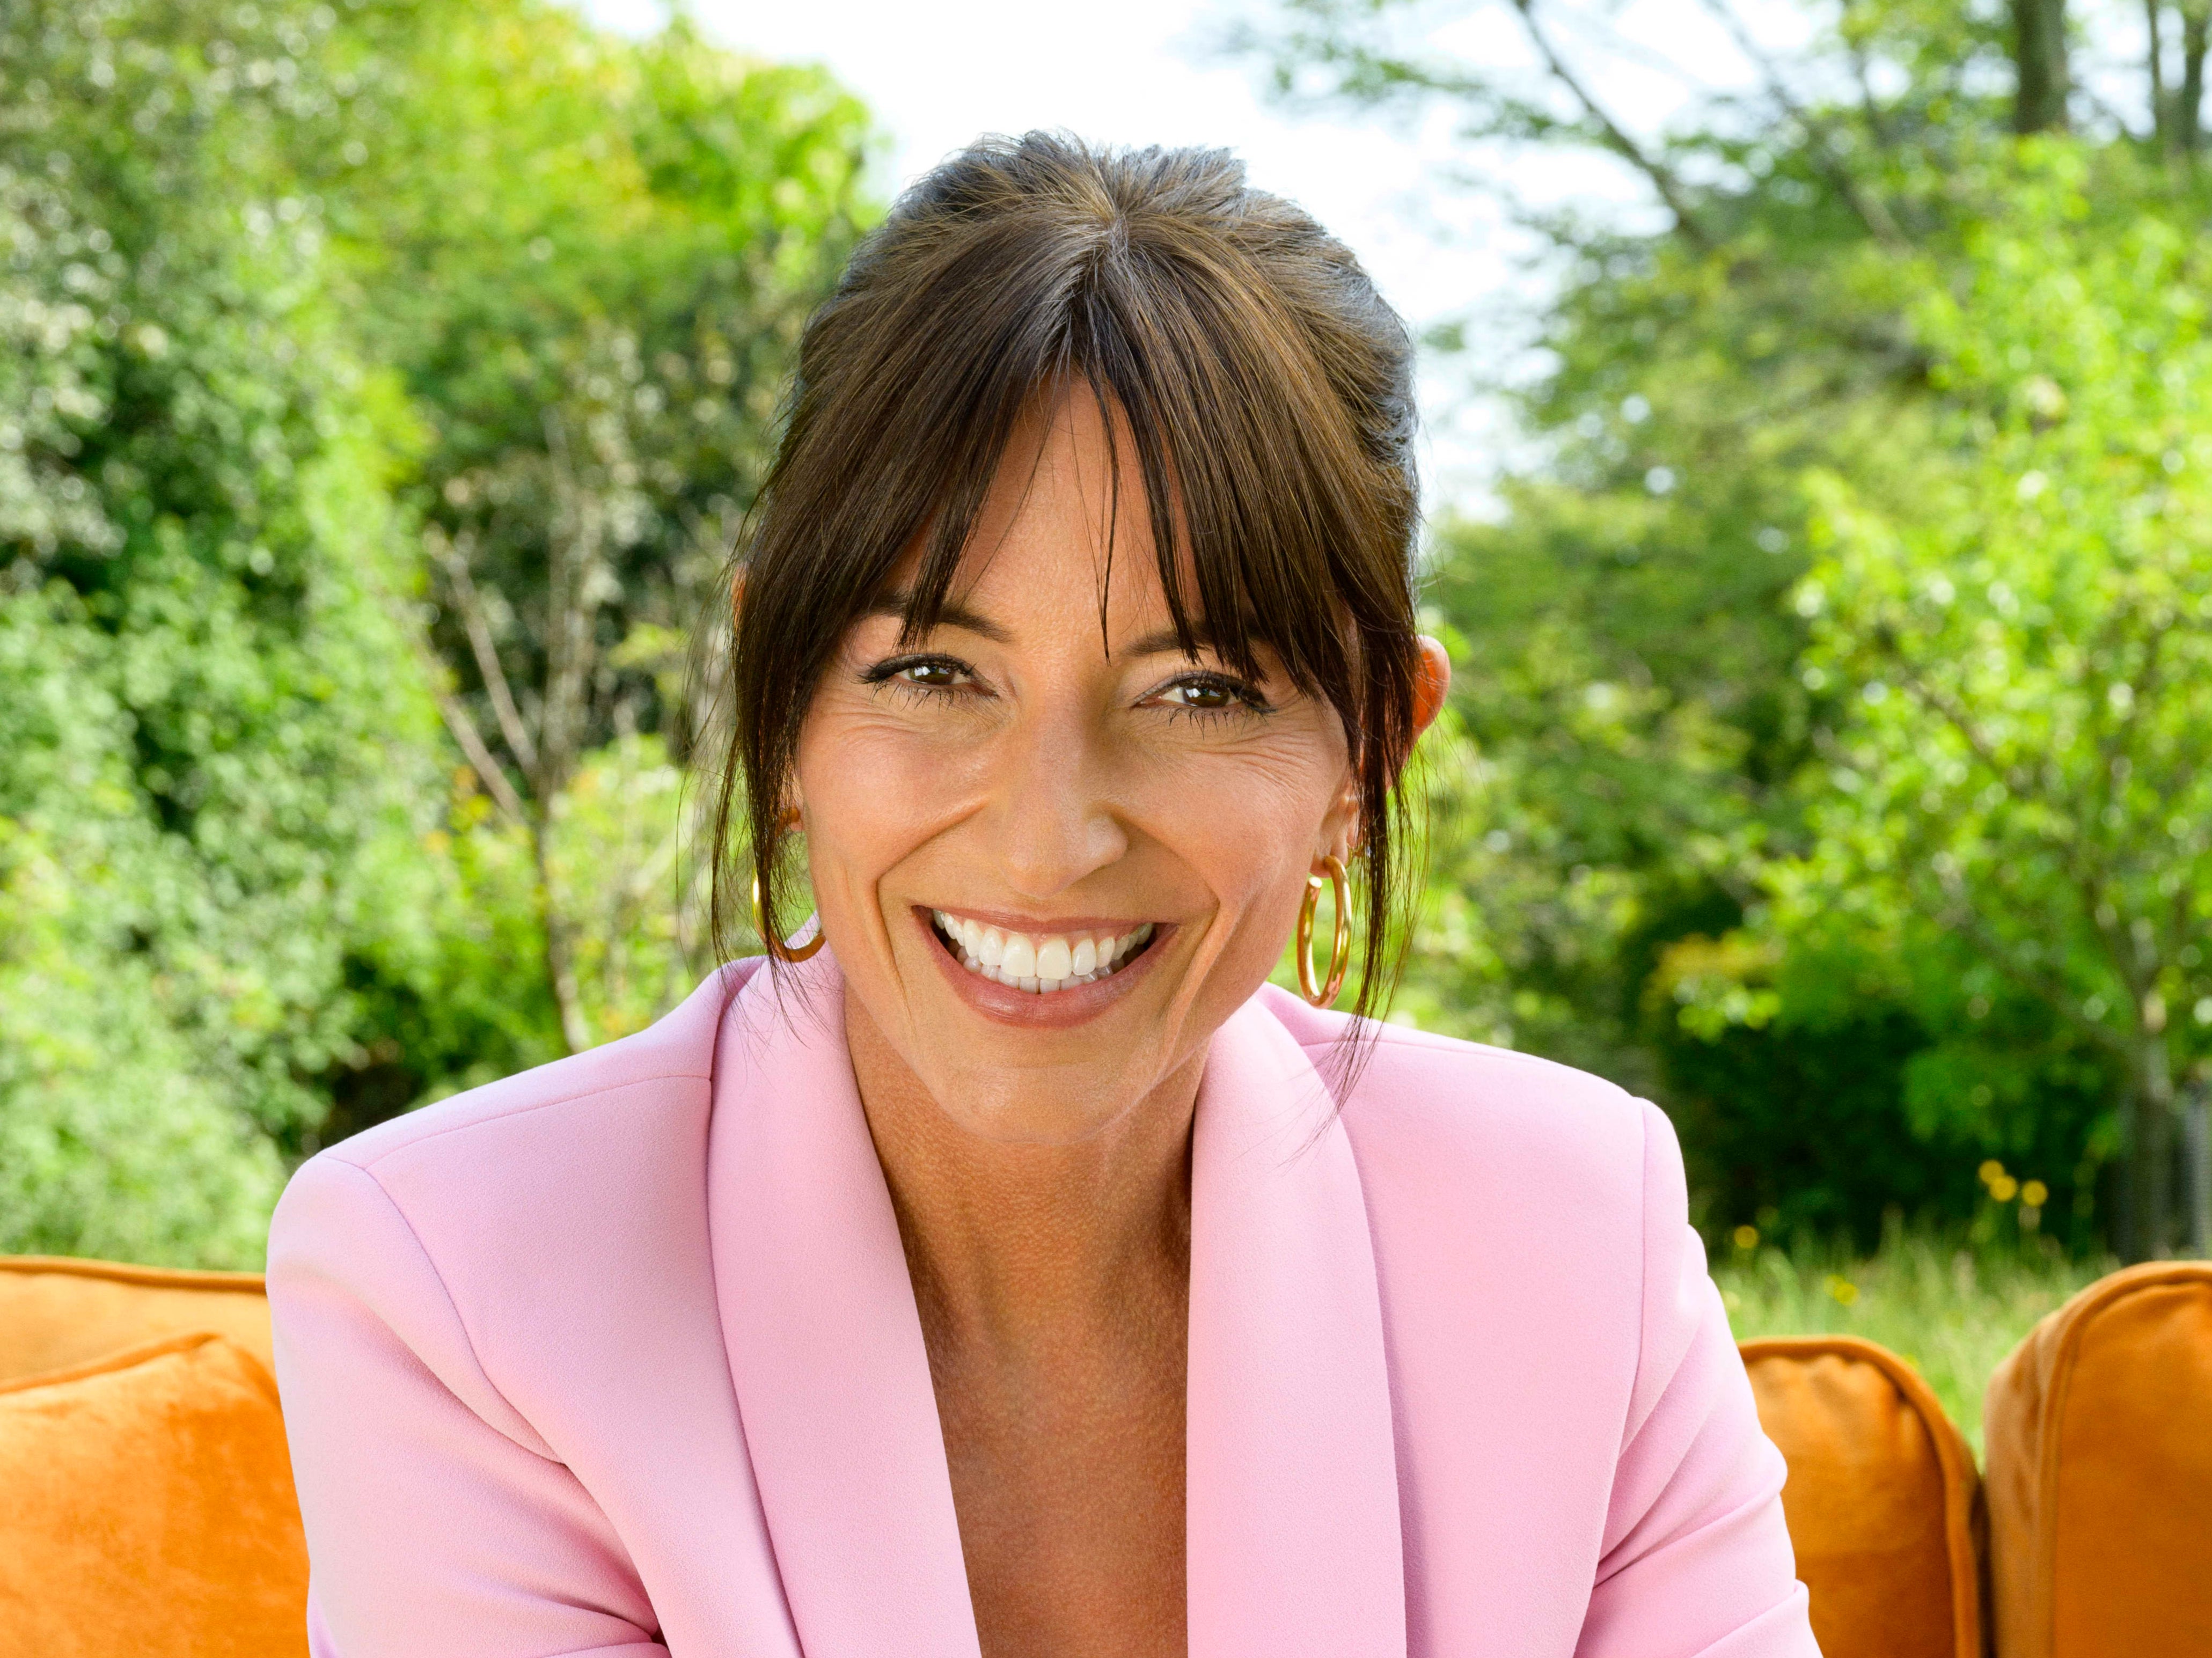 Davina McCall had been trying to persuade ITV to do a dating show for single parents for a while